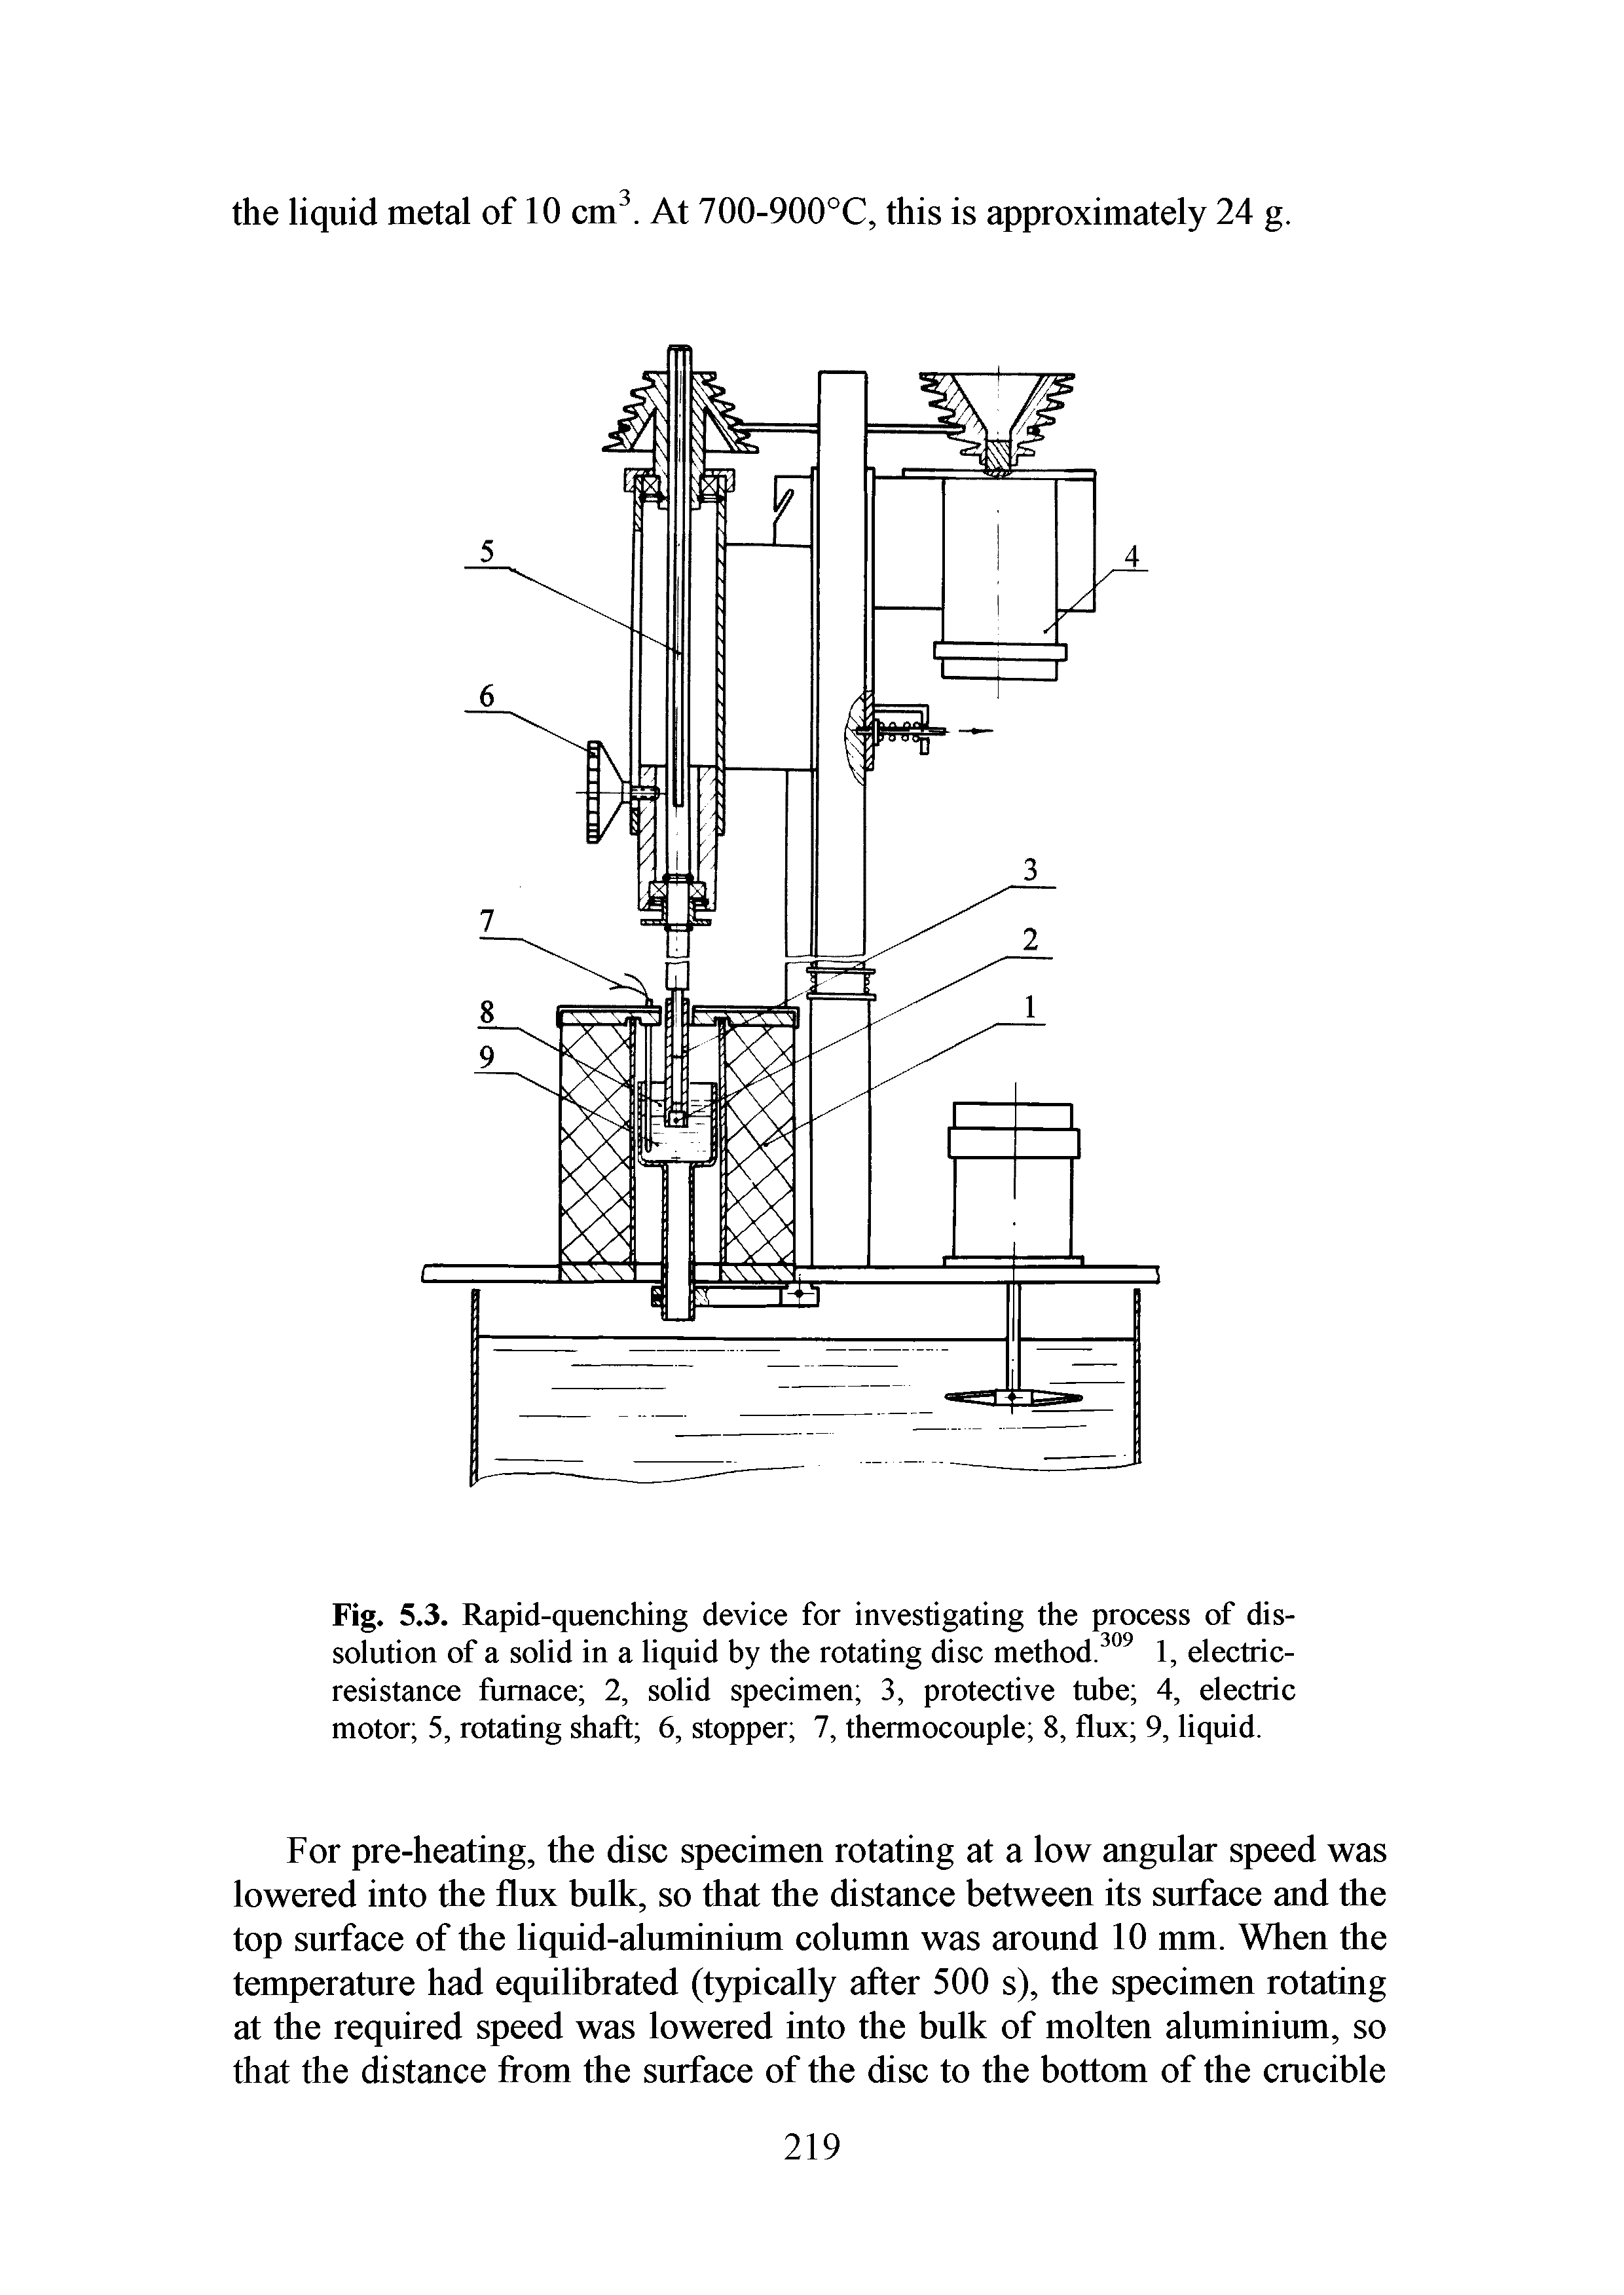 Fig. 5.3. Rapid-quenching device for investigating the process of dissolution of a solid in a liquid by the rotating disc method.309 1, electric-resistance furnace 2, solid specimen 3, protective tube 4, electric motor 5, rotating shaft 6, stopper 7, thermocouple 8, flux 9, liquid.